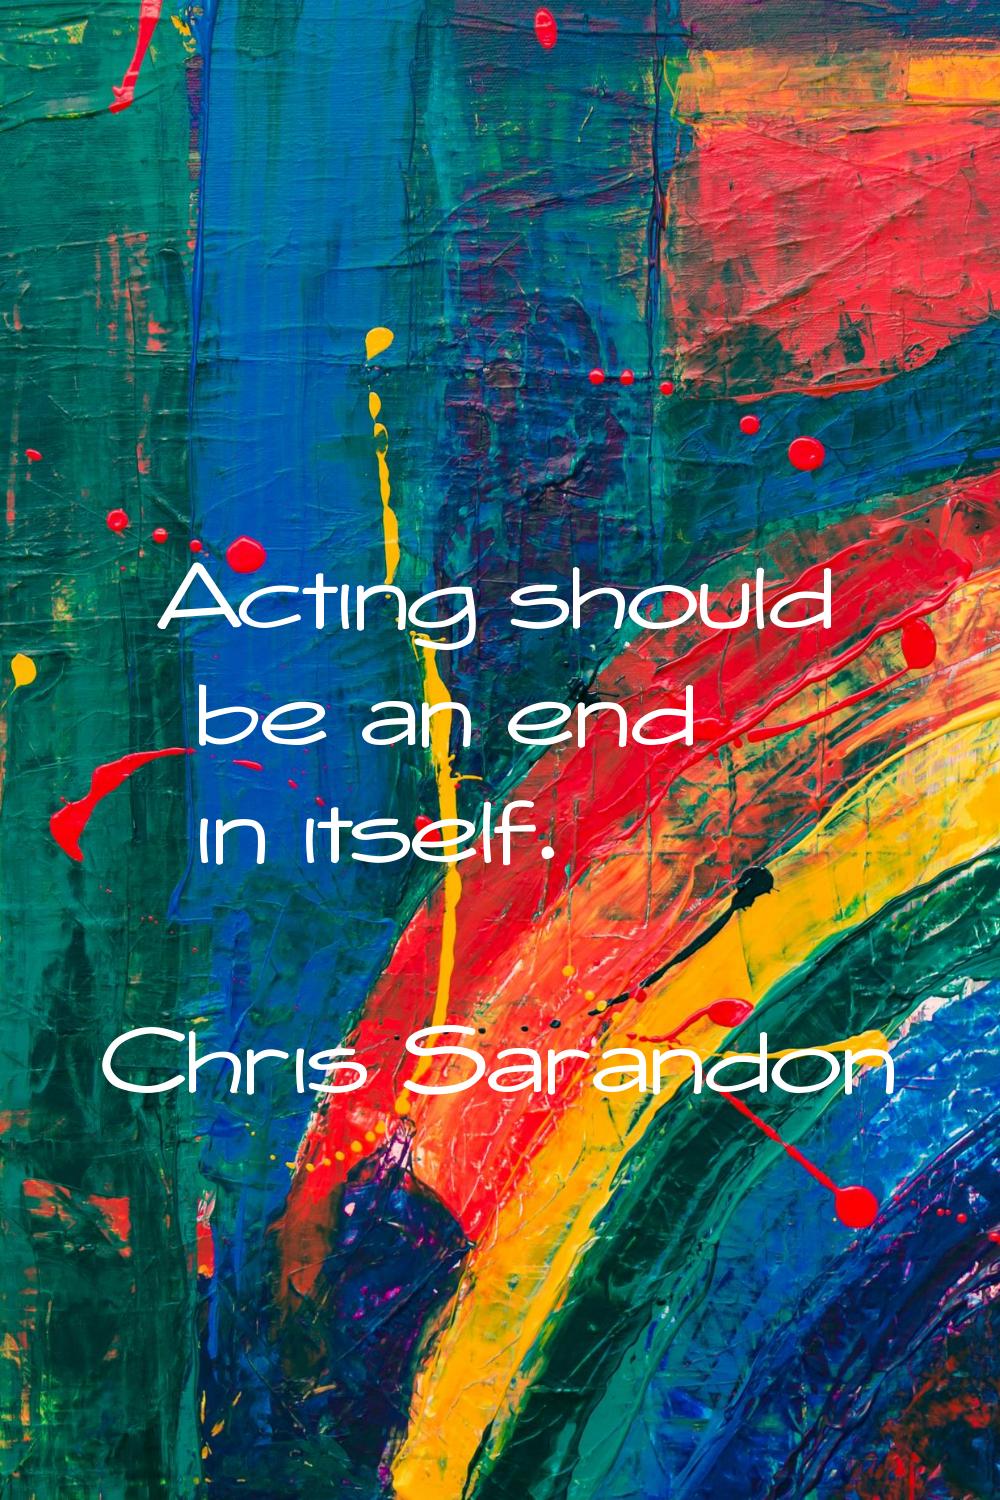 Acting should be an end in itself.